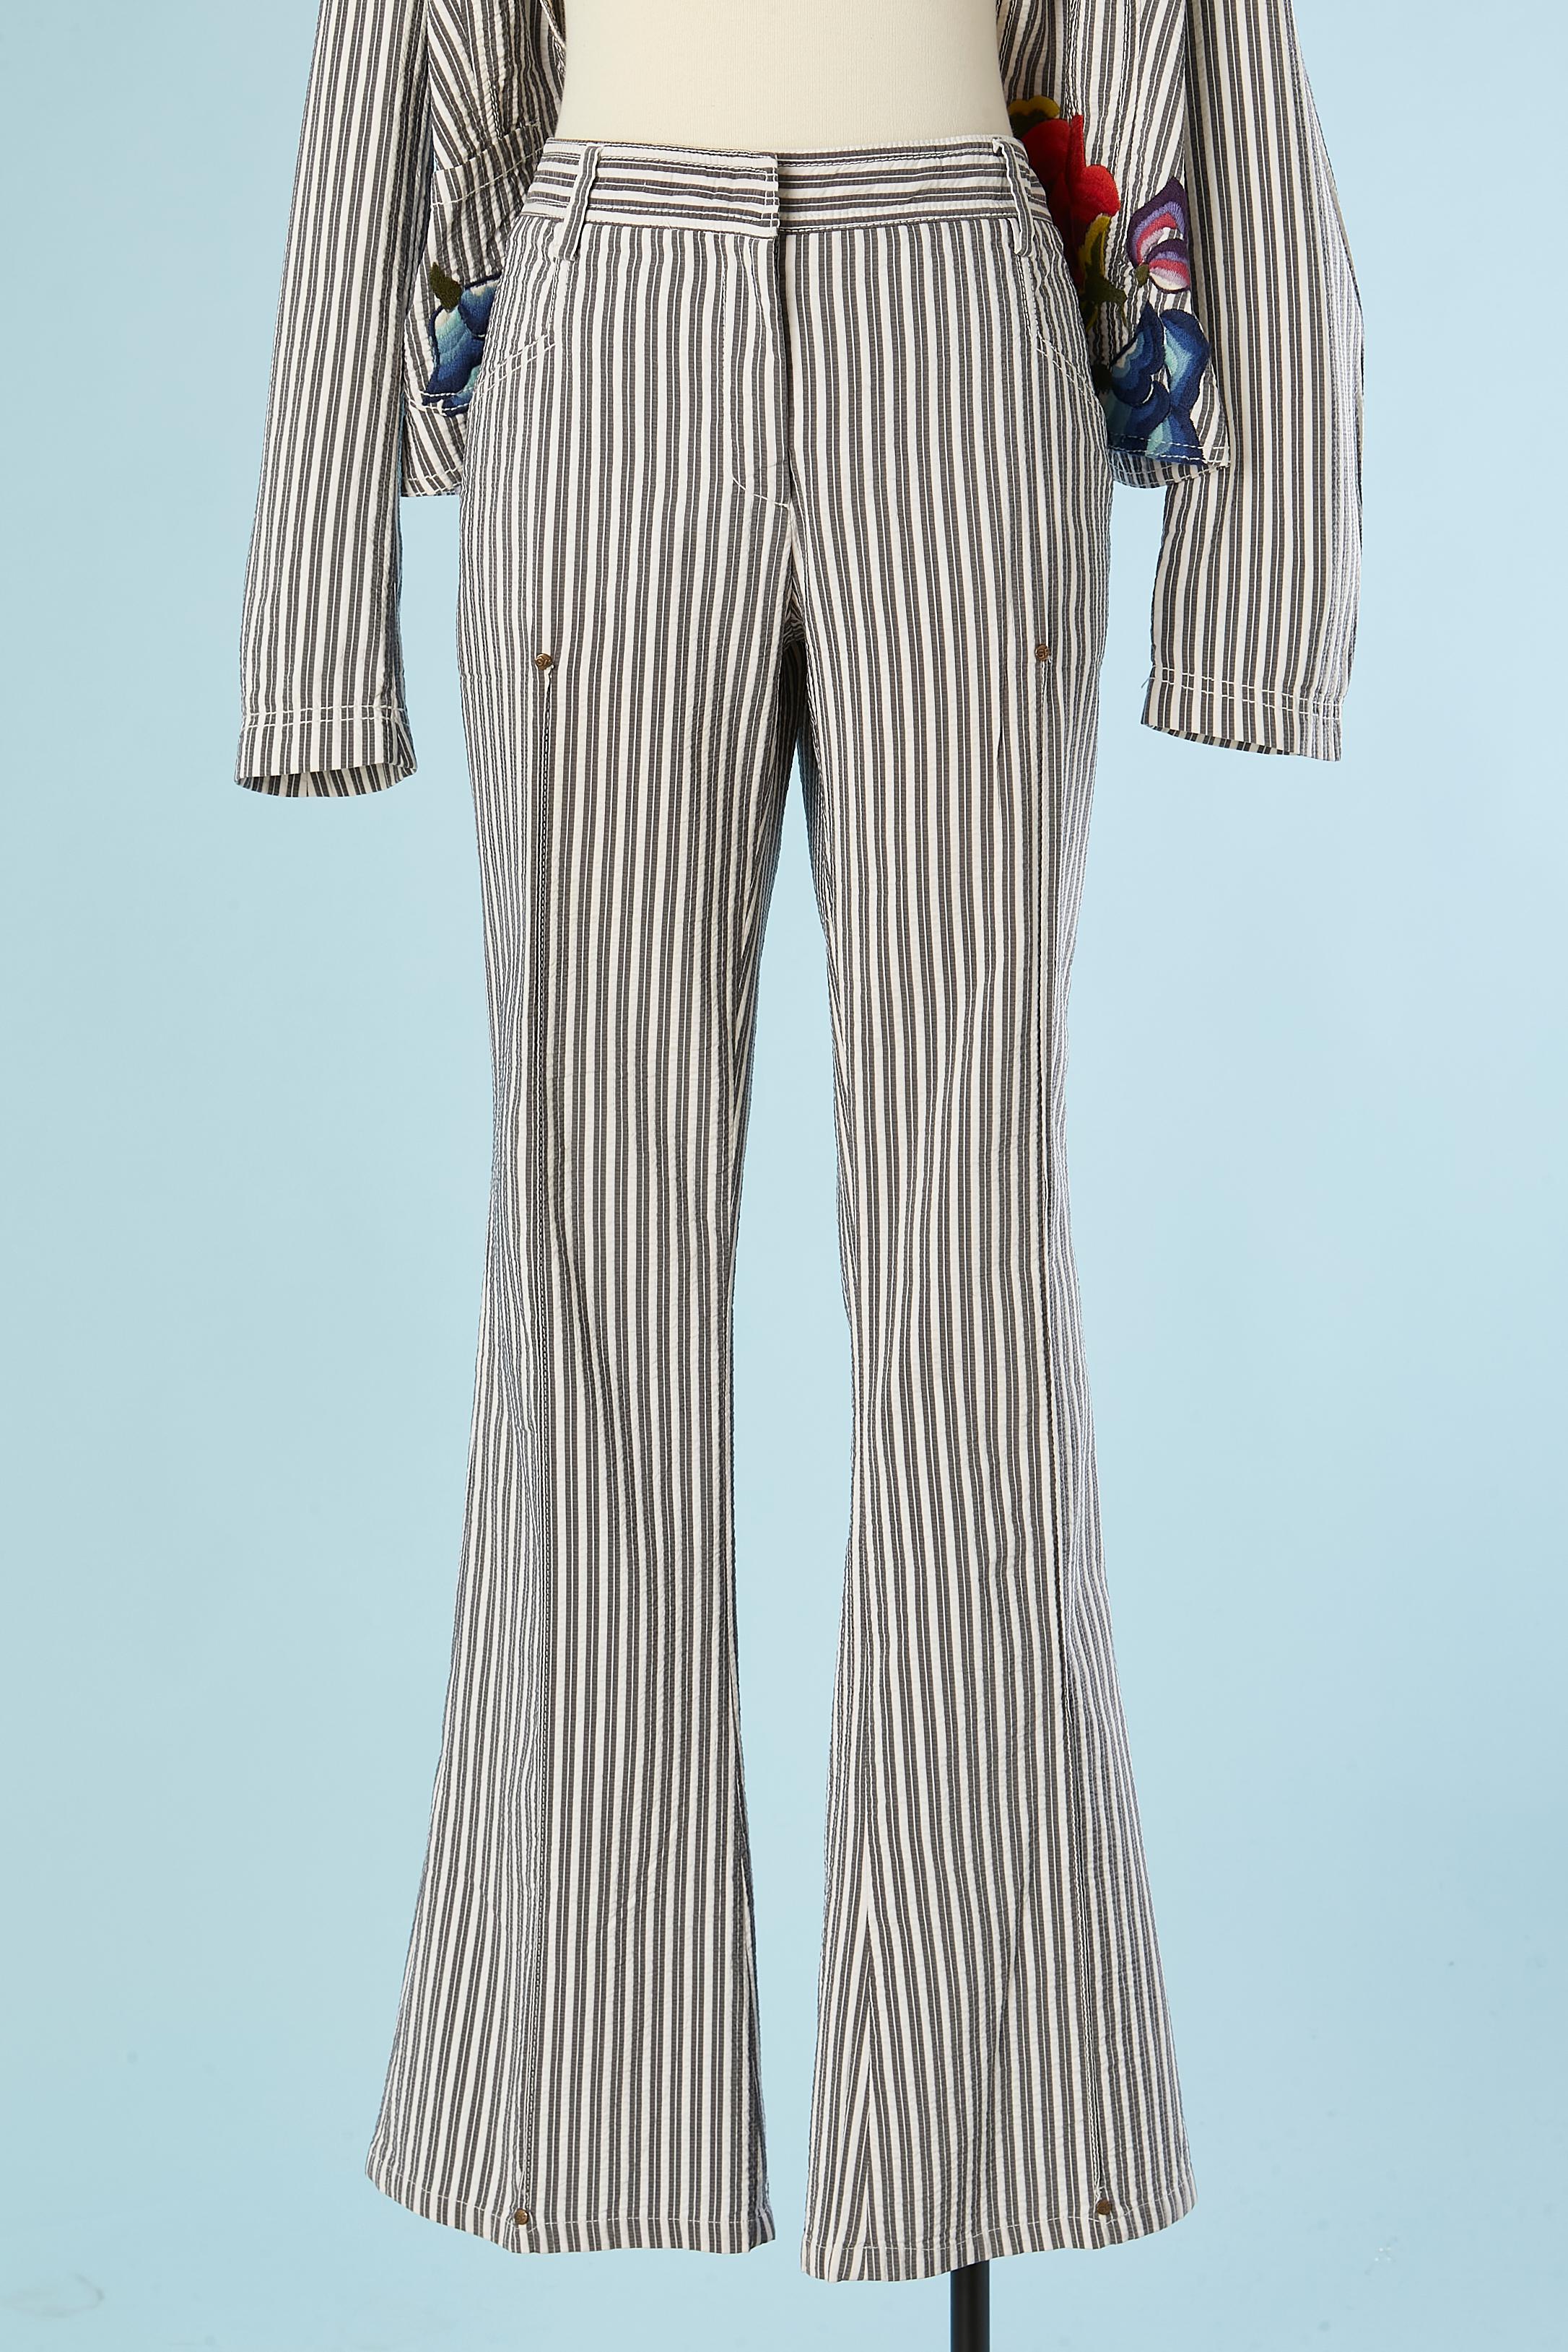 Striped trousers pant suit with threads flowers embroideries GF Ferré  For Sale 3